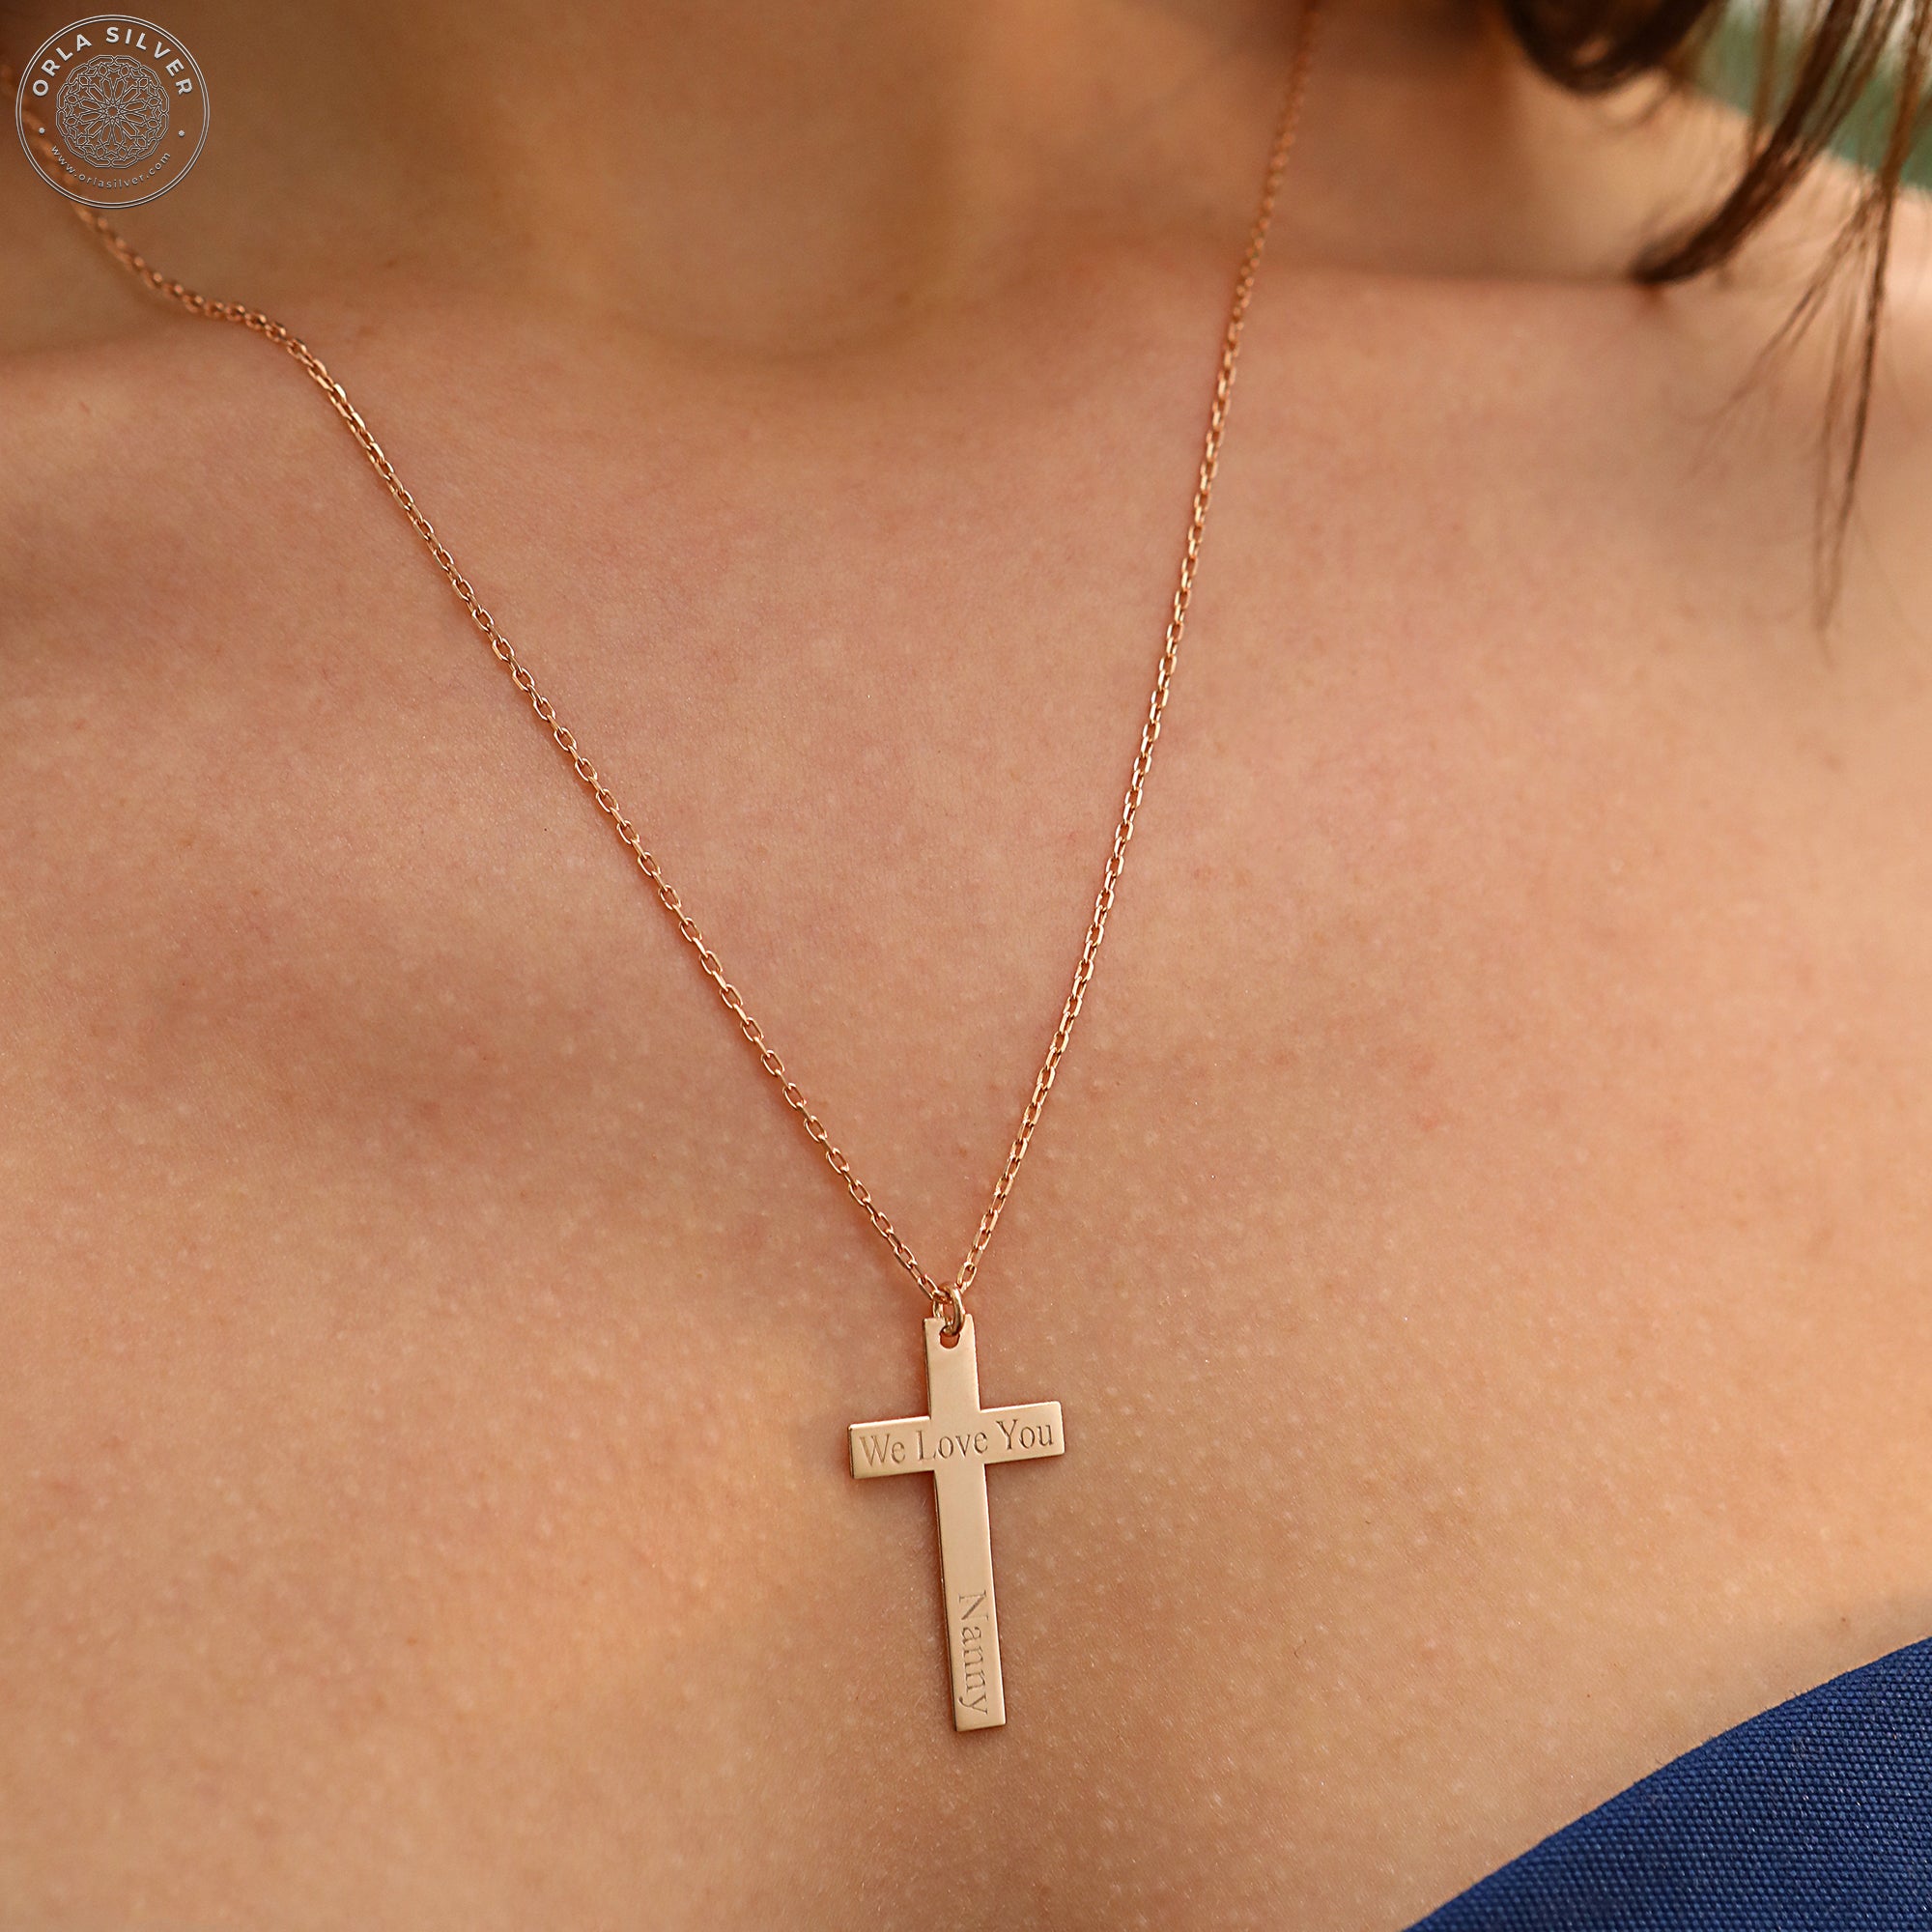 Buy Sterling Silver Cross Necklace, Large Cross Pendant, Religious Jewelry  Gift, Womens Christian Faith 925 Sterling Silver Cross, FREE SHIPPING  Online in India - Etsy